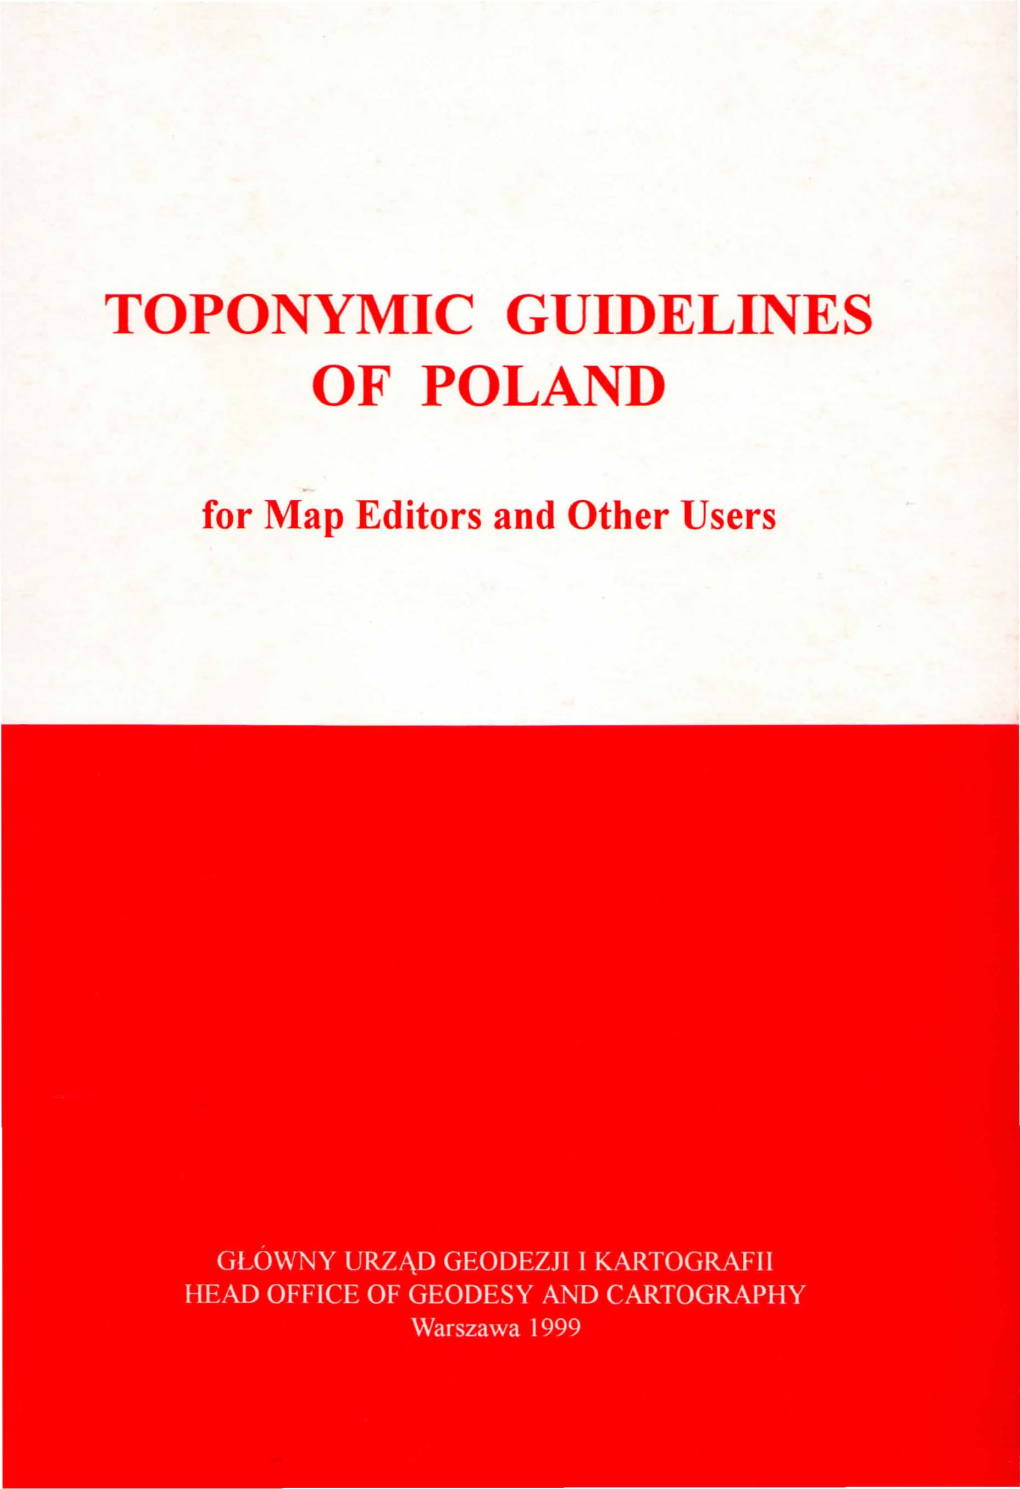 Toponymic Guidelines of Poland